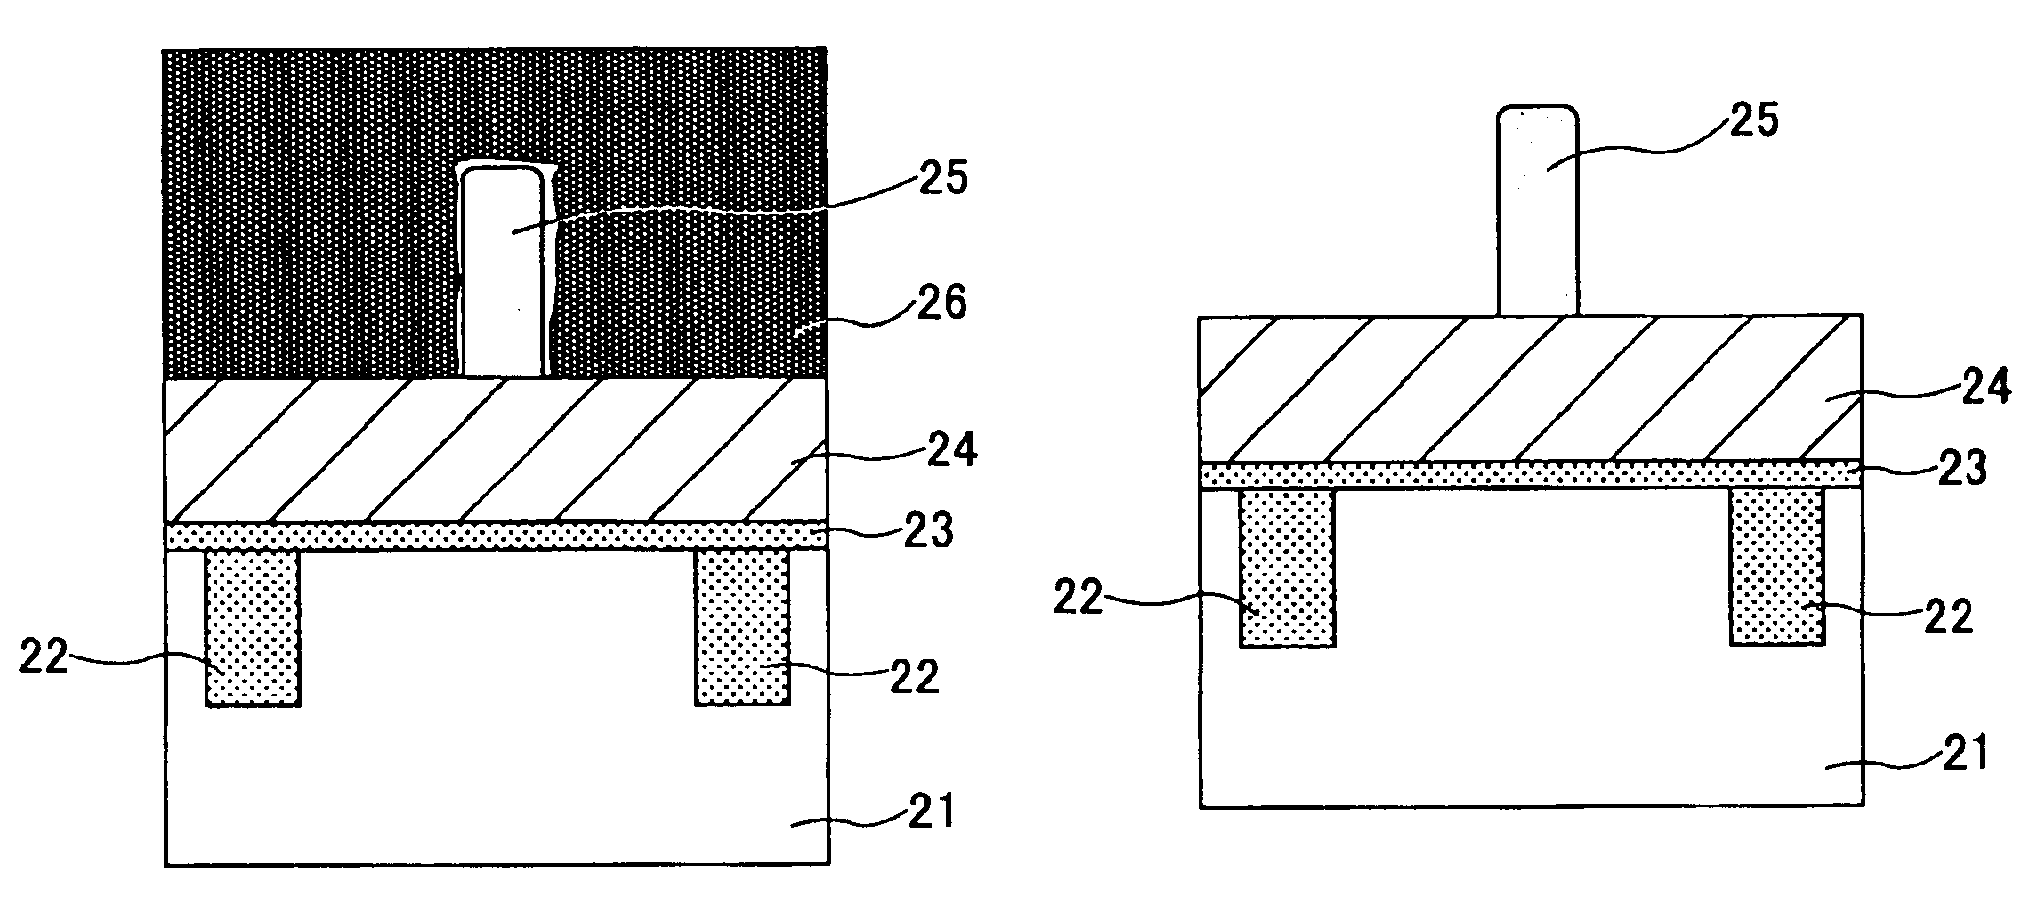 Semiconductor apparatus fabrication method forming a resist pattern, a film over the resist, and reflowing the resist